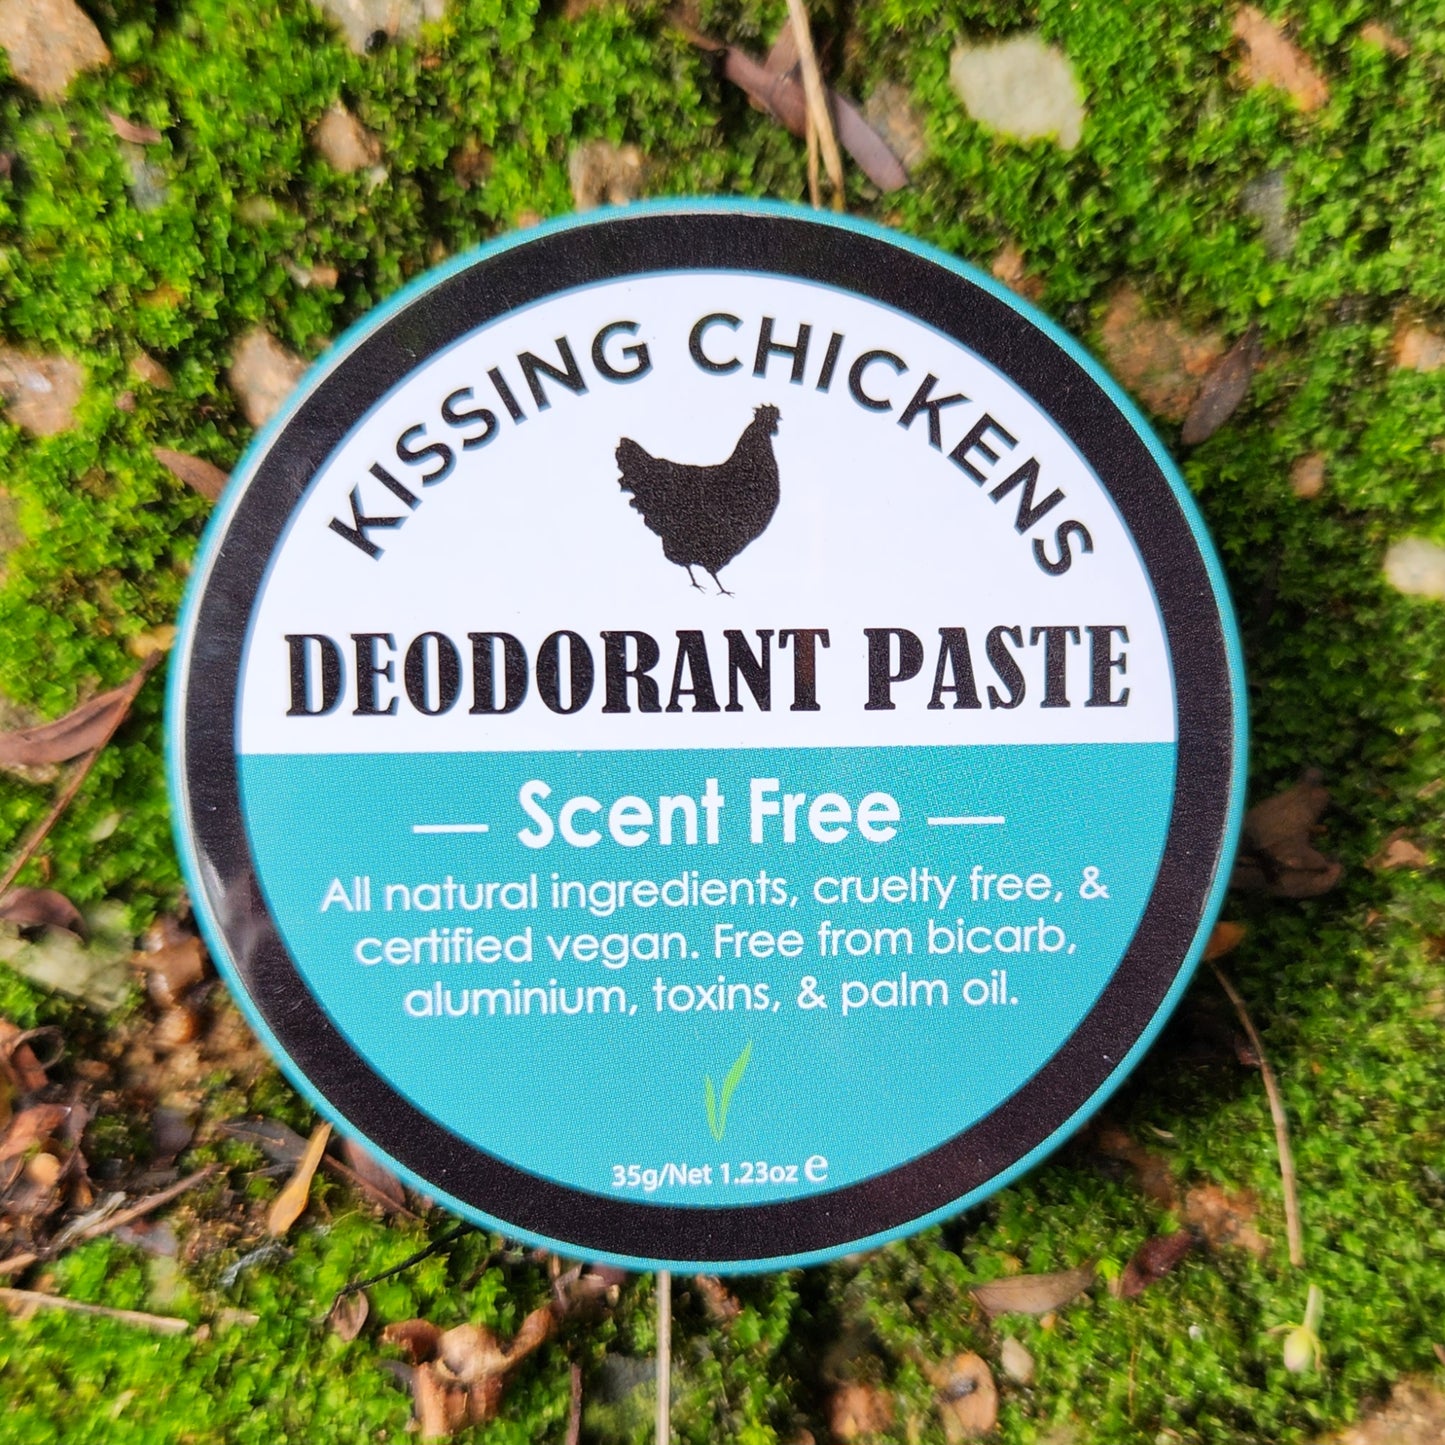 NEW! Kissing Chickens Bicarb-free Natural Deodorant Paste - Scent Free 35g tin